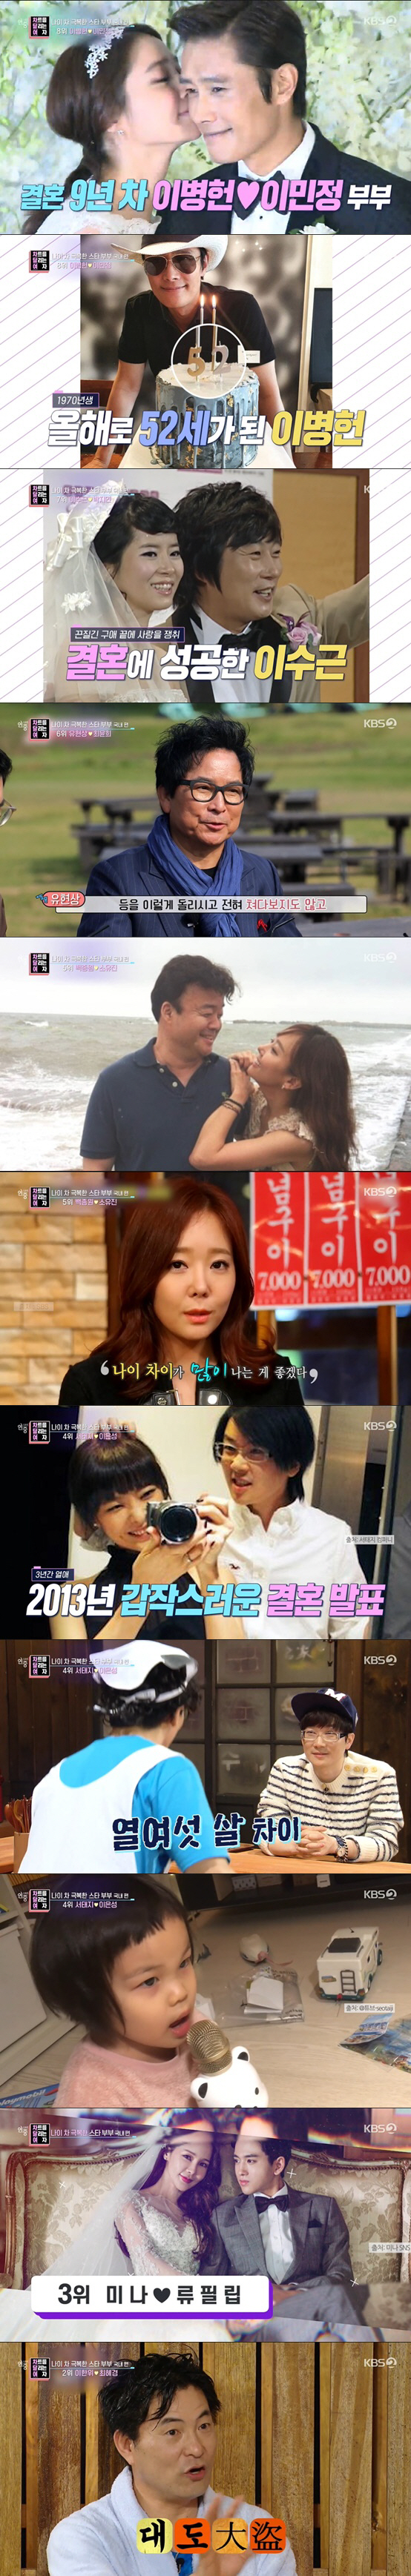 In Year-round live, star couples who overcame the huge Age difference were introduced.In the ranking corner of KBS2 live broadcast Year-round live on the 13th, Age is only a number, and the star couples who overcame the huge Age difference with Super Real love exceeding the sweetness limit were introduced.The top two are Actor Lee Yeong-ae and Jeong Ho-young; the twos Age cars are as young as 20.Lee Yeong-ae, who posted a secret marriage ceremony in Hawaii in 2009, said in a subsequent interview that I had a quiet marriage ceremony, he said. Husband is a trustworthy and sincere person.Lee Yeong-ae has been attracting attention since she released Husband and her twin children through broadcasting in five years of marriage.Especially, the fun Korean businessman, Jeong Ho-young, was surprised to see that Property was about 2 trillion One.Third place is Singer Mina and Ryu Philip, the couple of whom are 17-year-olds with a huge Age car, who overcome opposition from both families and eventually netted for marriage in 2018.Fourth place was Singer Seo Taiji and Actor Lee Eun-sung; two who developed into lovers, starring Lee Eun-sung in the music video for Seo Taiji.Their Age car is 16 years old; Seo Taiji appeared on a talk show in the past and said, When I talk to my wife, I feel a generational difference.When I talk about the old days, my wife is not interested. The two are now having a daughter and continuing a happy marriage life.The fifth place is the 15-year-old Age-cha, the one So Yoo-jin couple, but So Yoo-jins parents also have 30-year-old Age-cha.So Yoo-jin said, My parents have a lot of Age cars, but I have never fought, and I was envious of the difference between Age.Choi and Yoon-hee were in sixth place. Choi, who started dating Yoo Hyeon-sang, who was 13 years old, was confronted with extreme opposition from the family.Yoo Hyun-sang recalled at the time, I went to say hello to my wifes house, but she turned her back and did not look at me at all.Seventh place is Lee Soo-geun Park Ji-yeon and his wife. The two are 12-year-old Age cars. Lee Soo-geun dashed for about six months to win the marriage.Lee Soo-geun said, I shed tears in the last breakup situation, and my wife was moved by the appearance and opened my heart.But during his marriage life, Park Ji-yeon underwent a kidney transplant.Lee Soo-geun said, My wife is healthy, my one. He is impressed by his constant love and sincerity for his wife.The star couple, who came in eighth place, were Lee Byung-hun and Lee Min-jung. Their Age car is 12 years old.The two, who had a breakup and met again in three years, finally overcame Age and succeeded in marriage in 2013, becoming a 9-year-old couple.